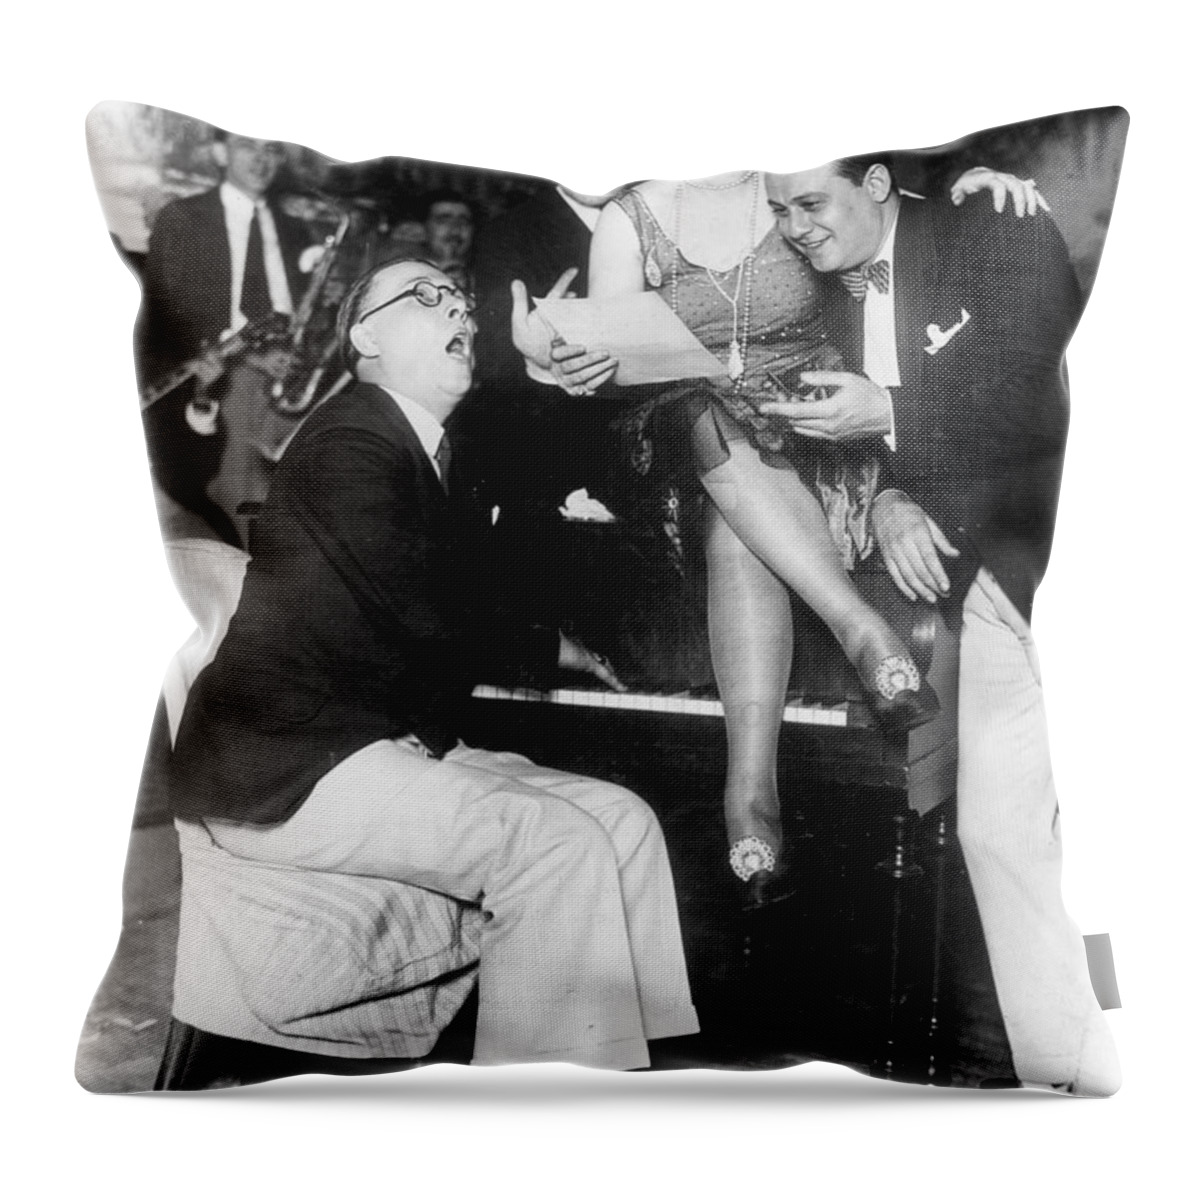 18th Amendment Throw Pillow featuring the photograph Prohibition: Speakeasy by Granger